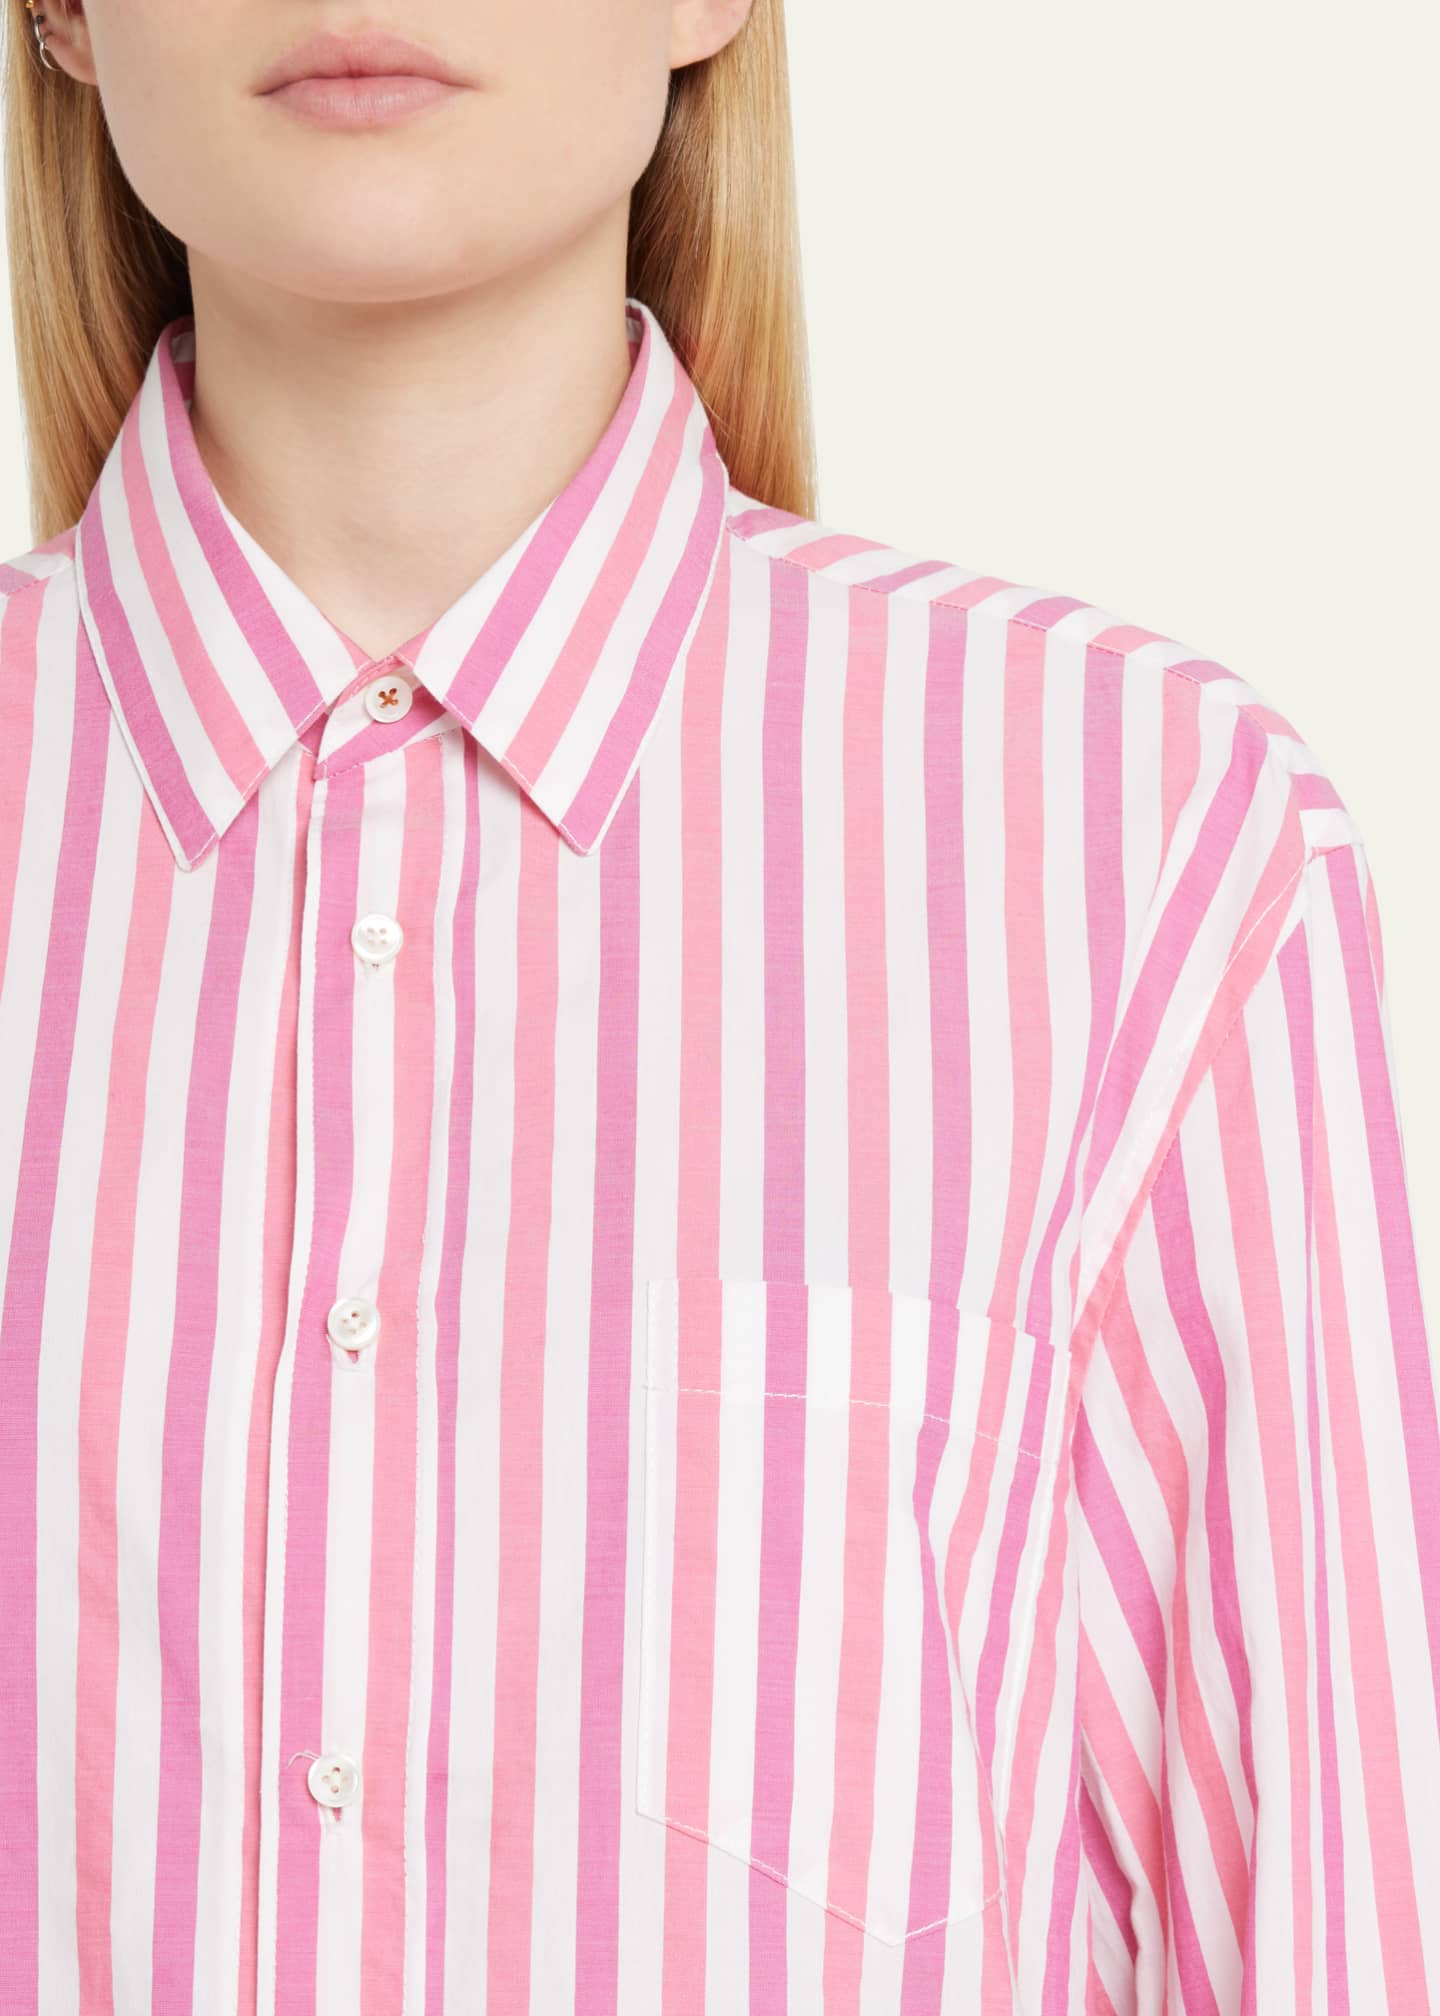 The Salting Striped Classic Button-Front Shirt - Bergdorf Goodman